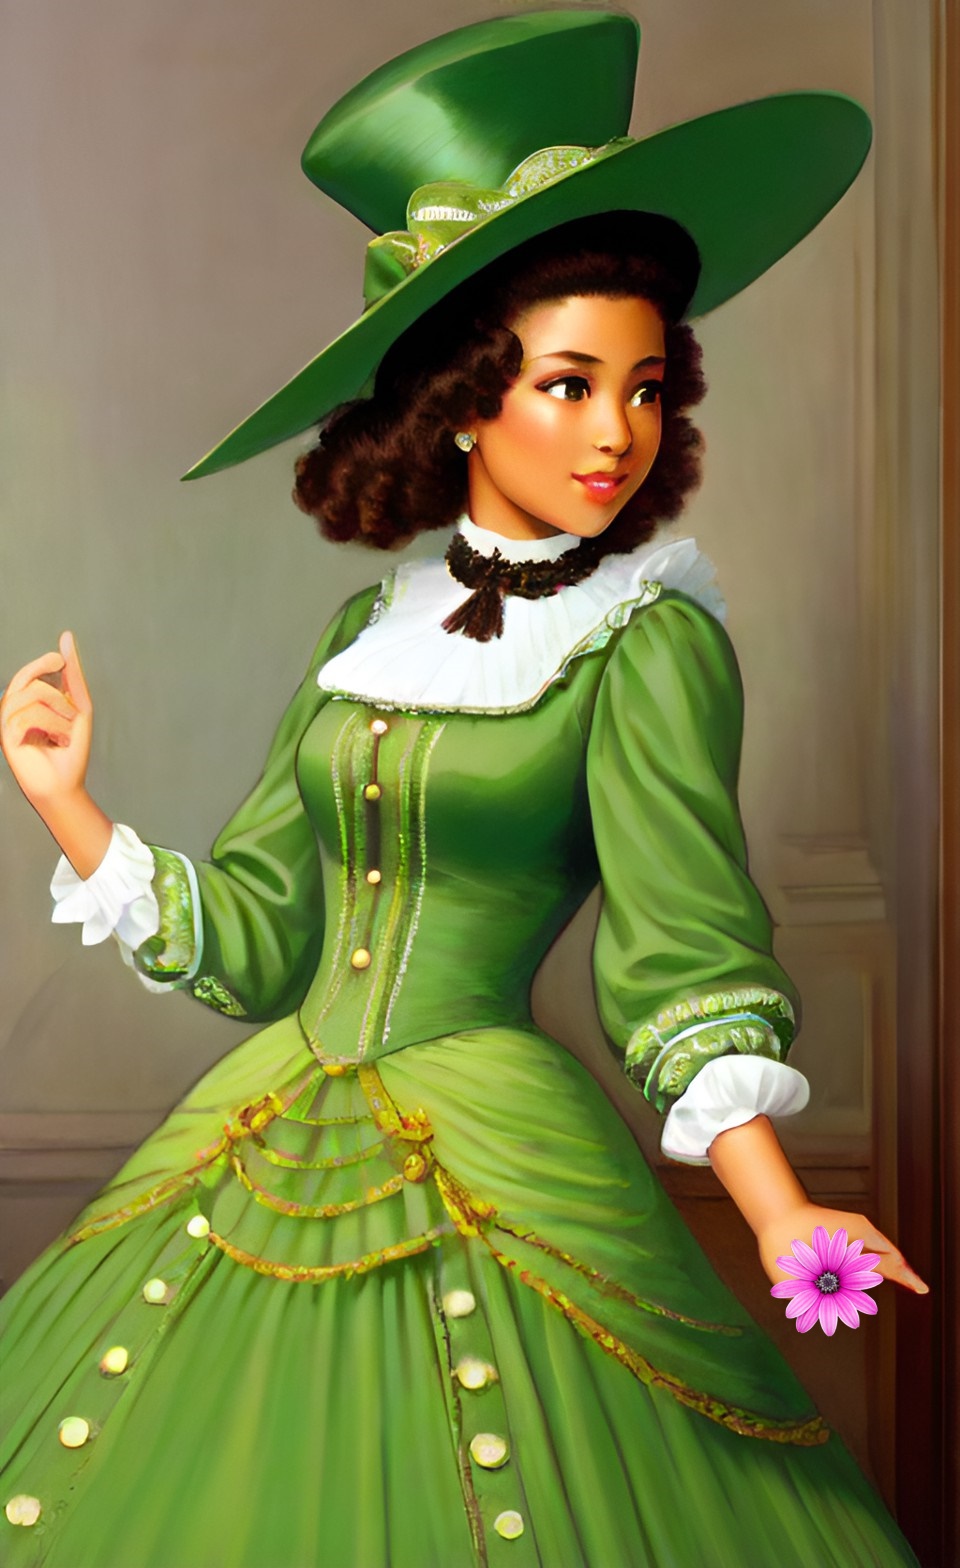 Sweet Mixed-race women in fine victorian era party dresses Mixed237